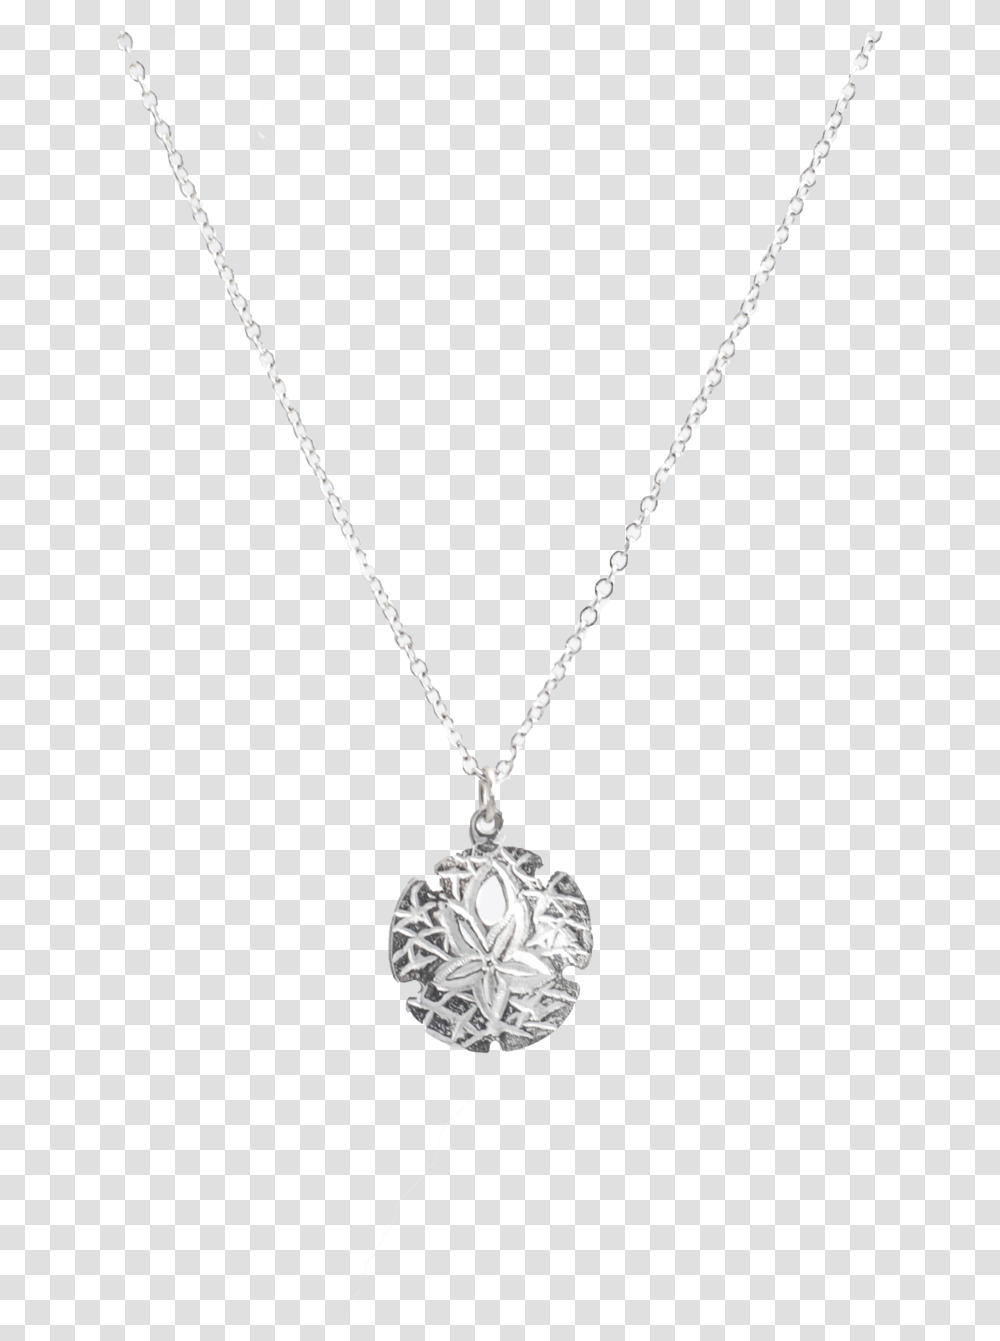 Small Sand Dollar Necklace Locket, Jewelry, Accessories, Accessory, Pendant Transparent Png